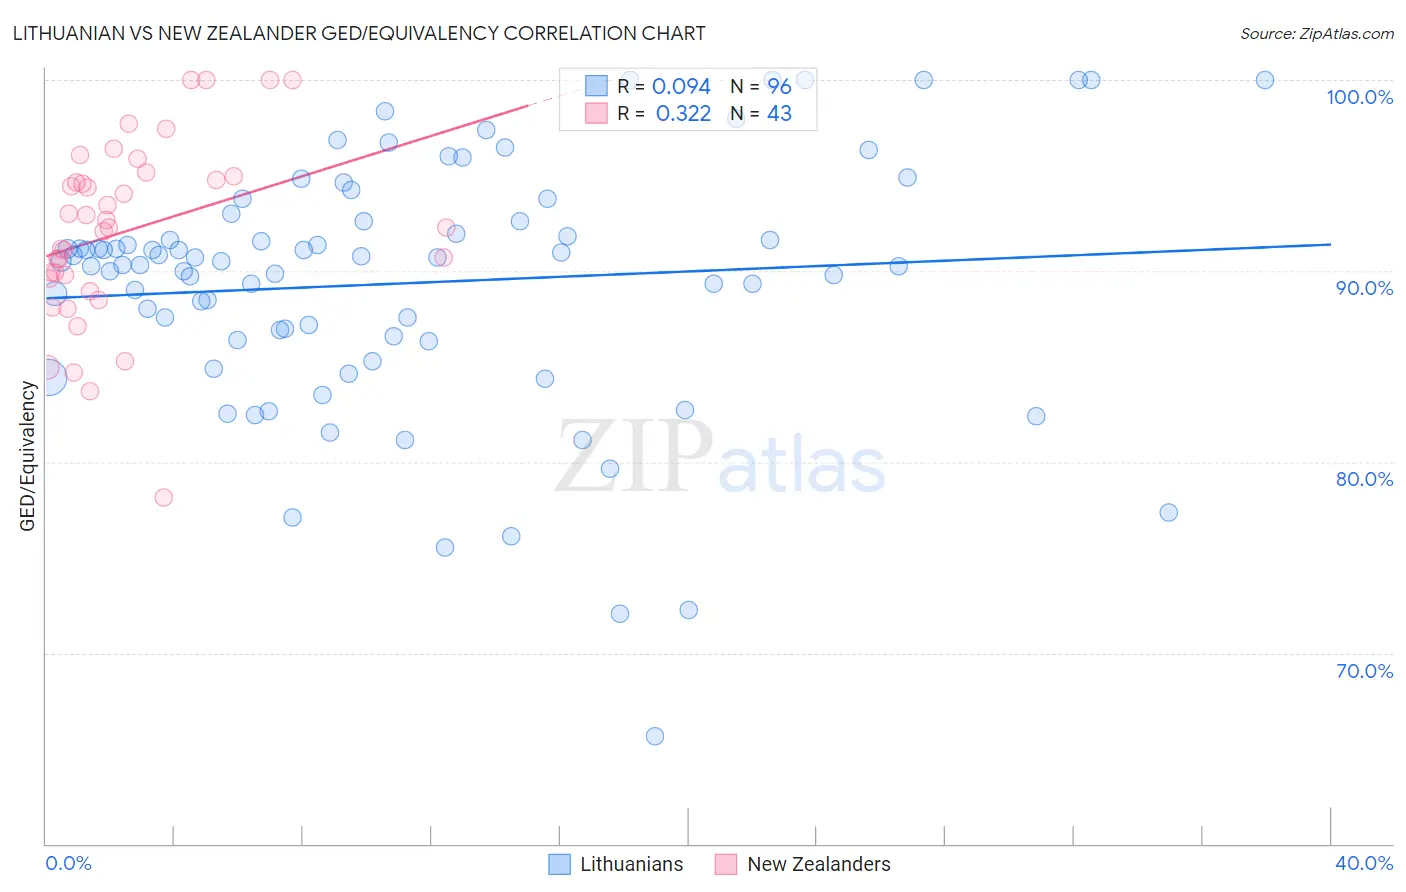 Lithuanian vs New Zealander GED/Equivalency